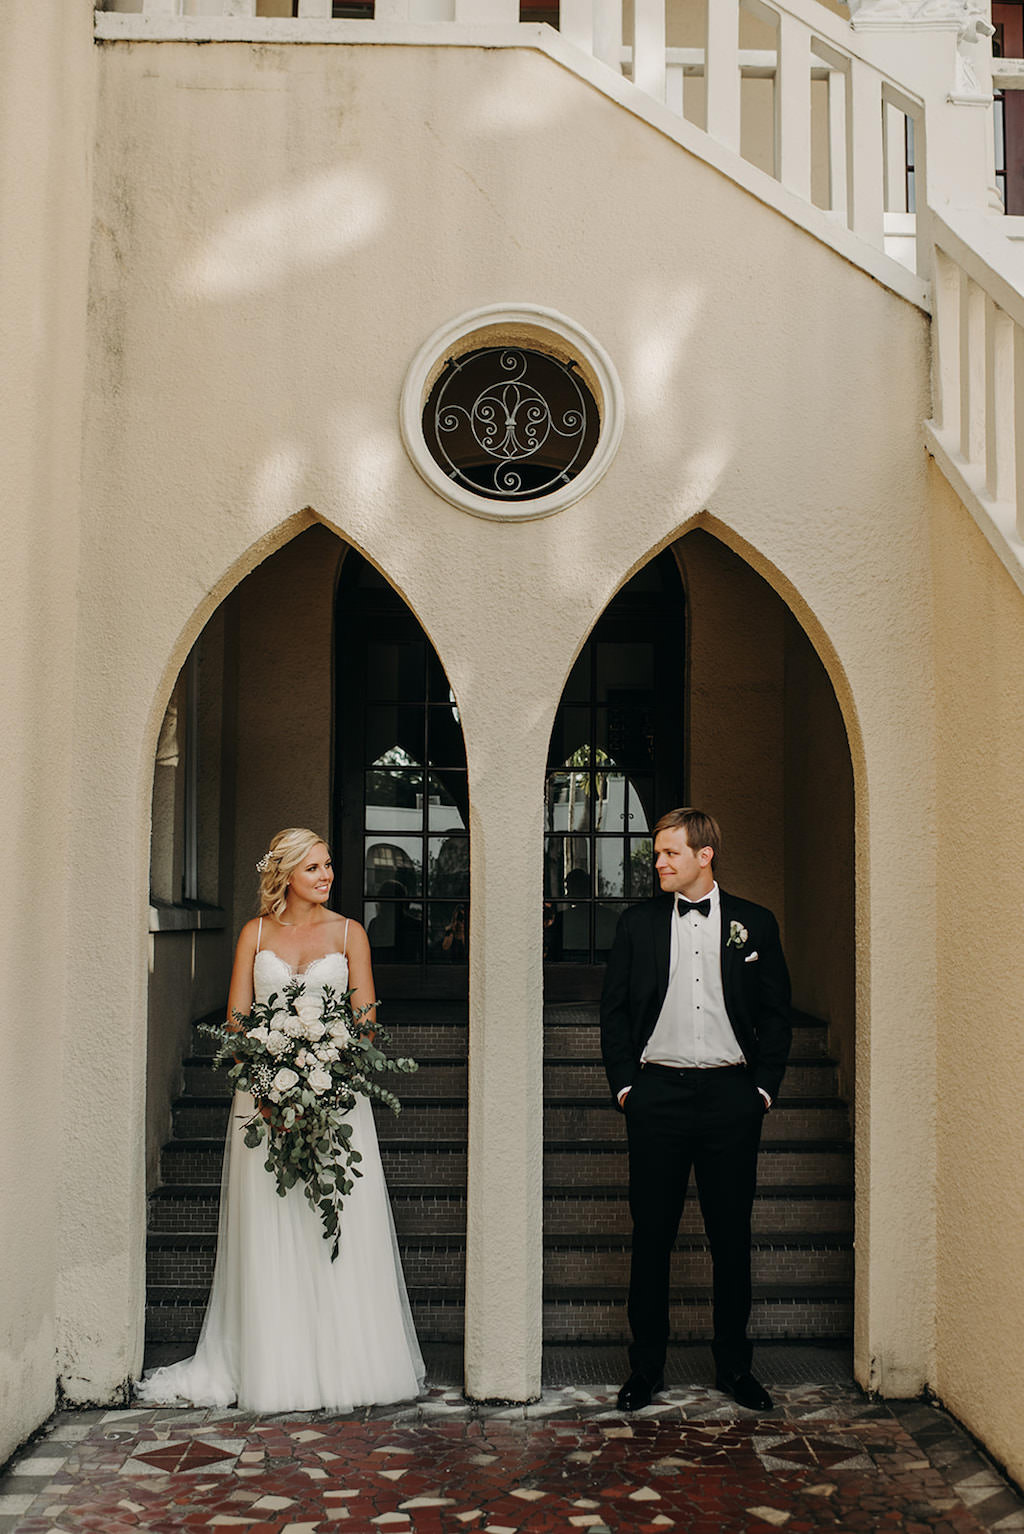 Bride and Groom First Look Wedding Portrait, Bride with Organic Greenery and White Ivory Floral Bouquet | Tampa Wedding Venue Davis Islands Garden Club